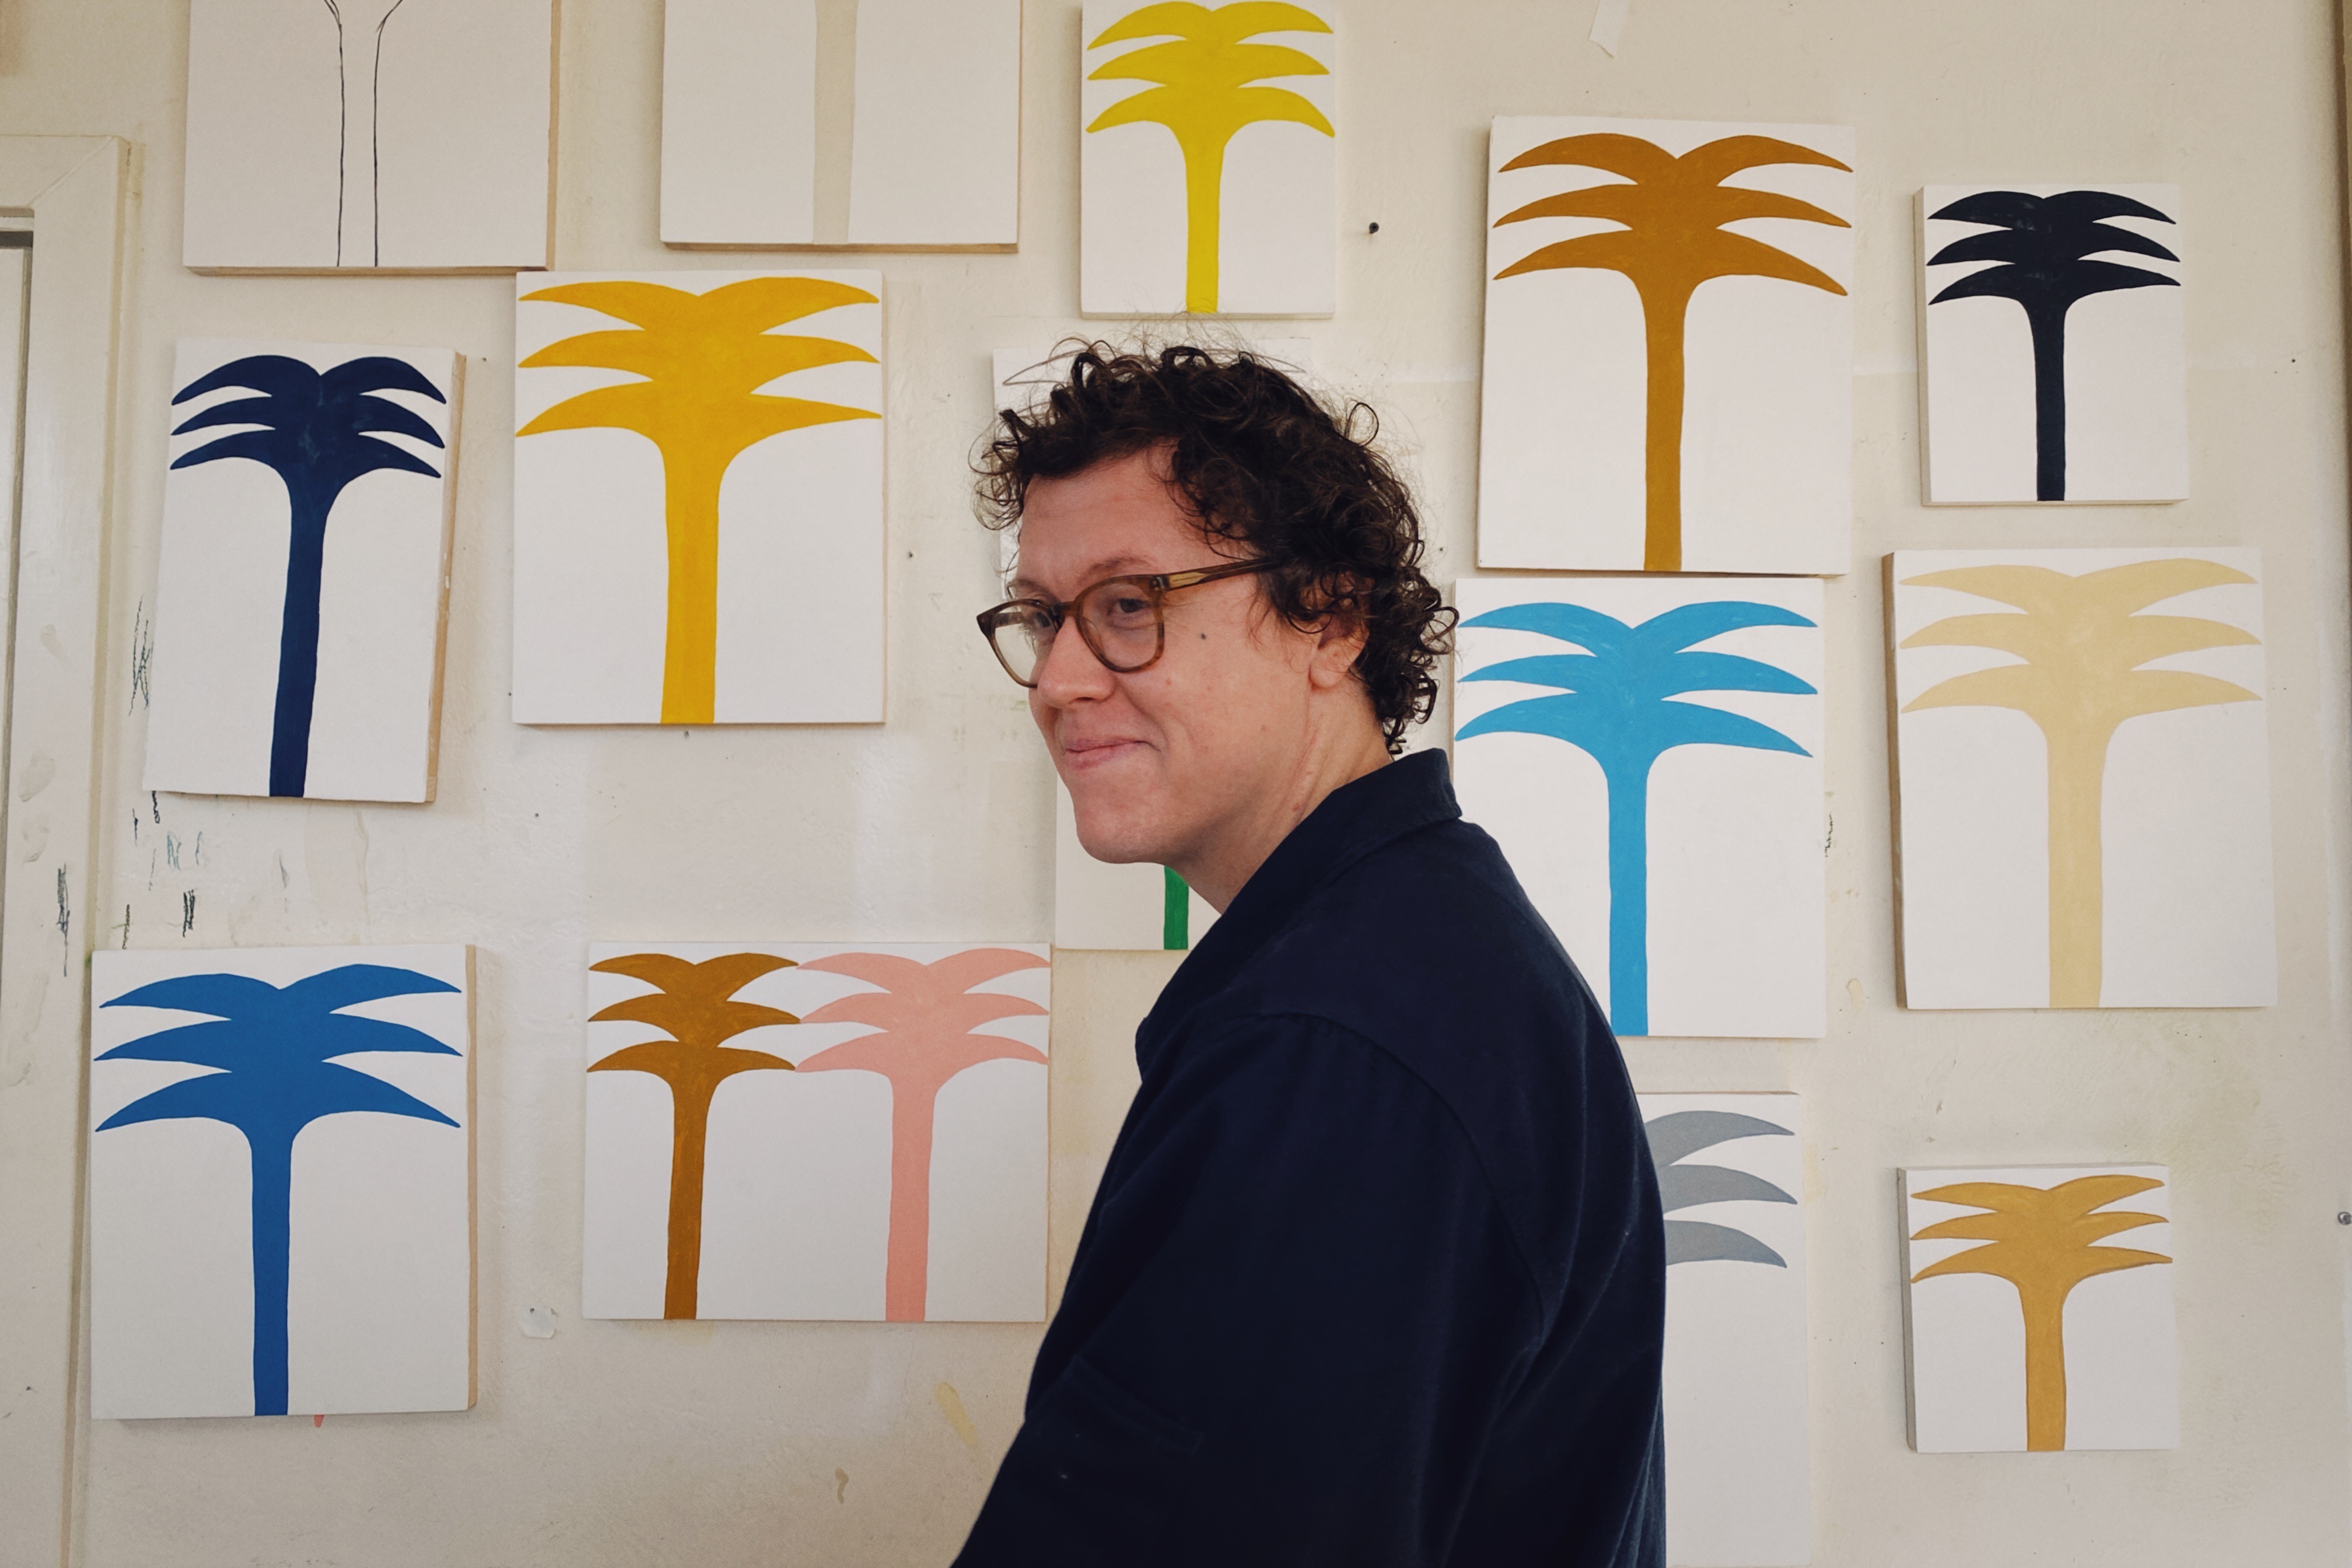 Ryan Whelan standing sideways in front of various colored graphic representations of palm trees.